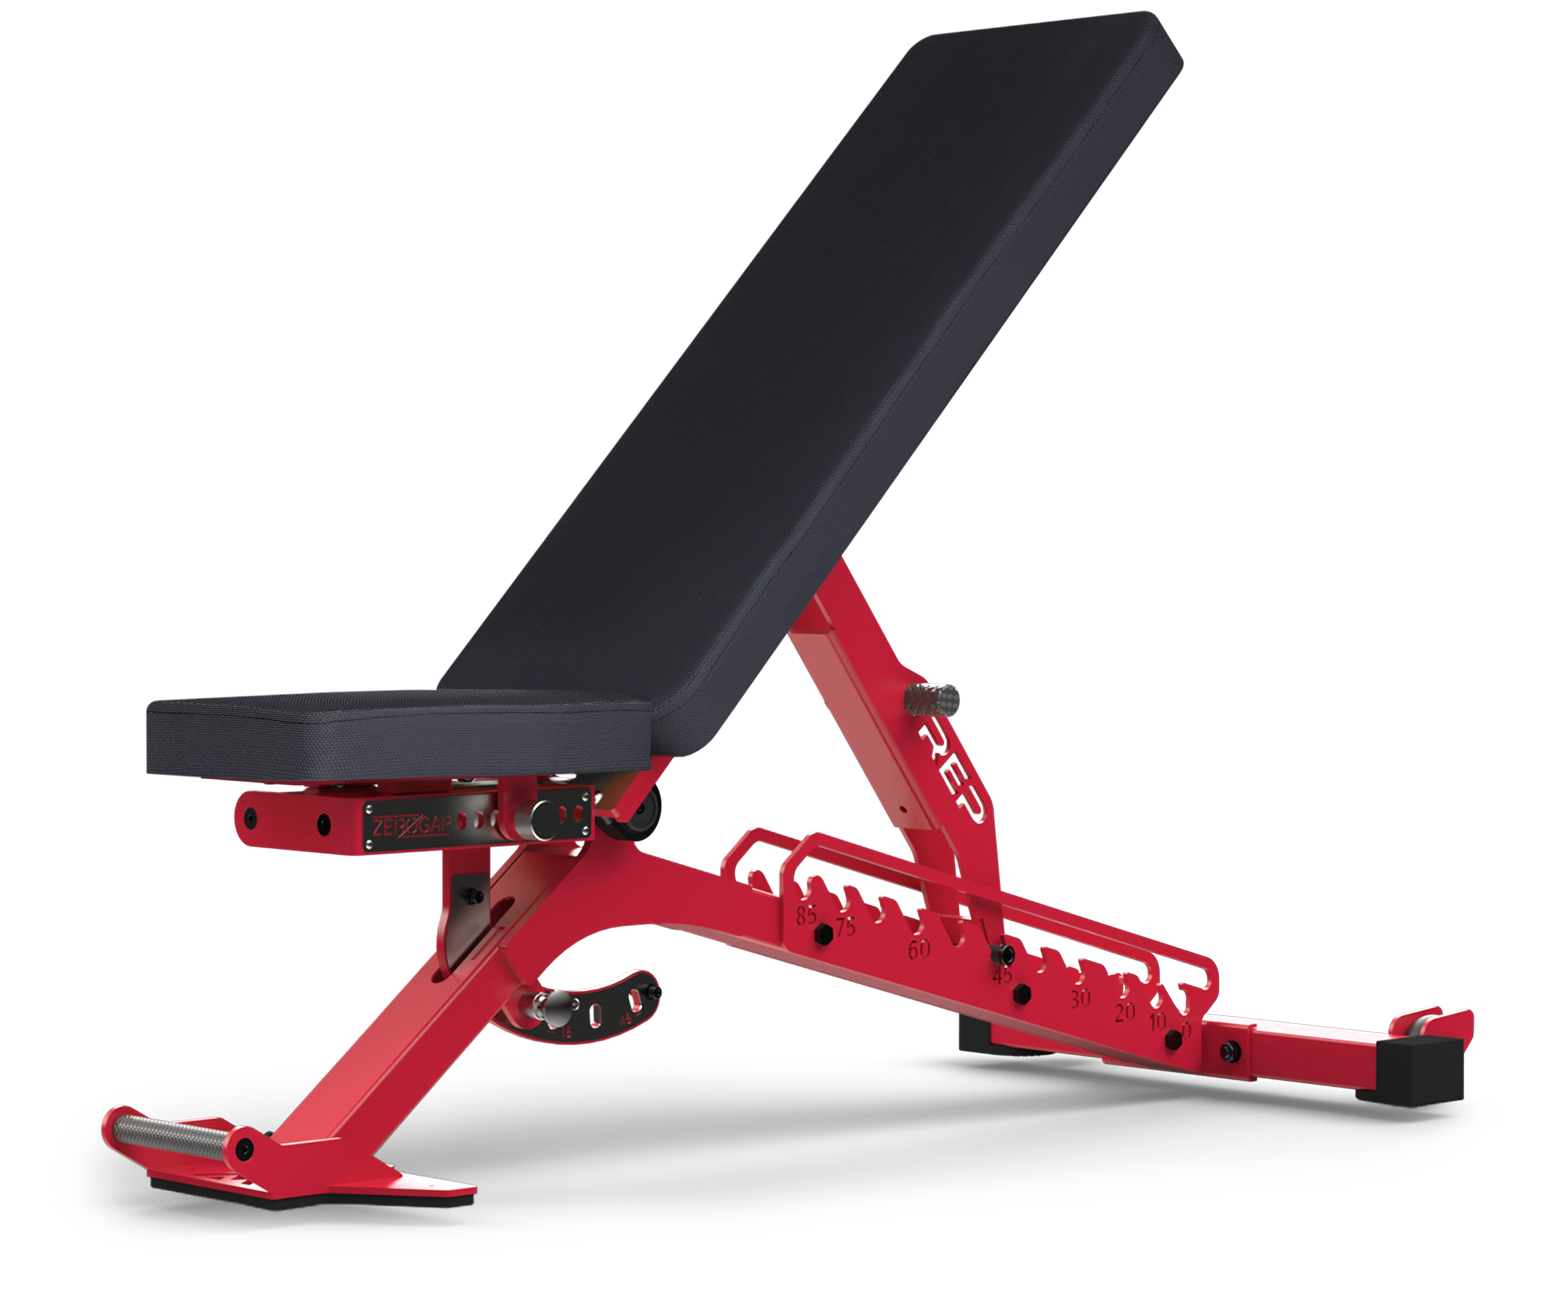 BlackWing™ Adjustable Weight Bench